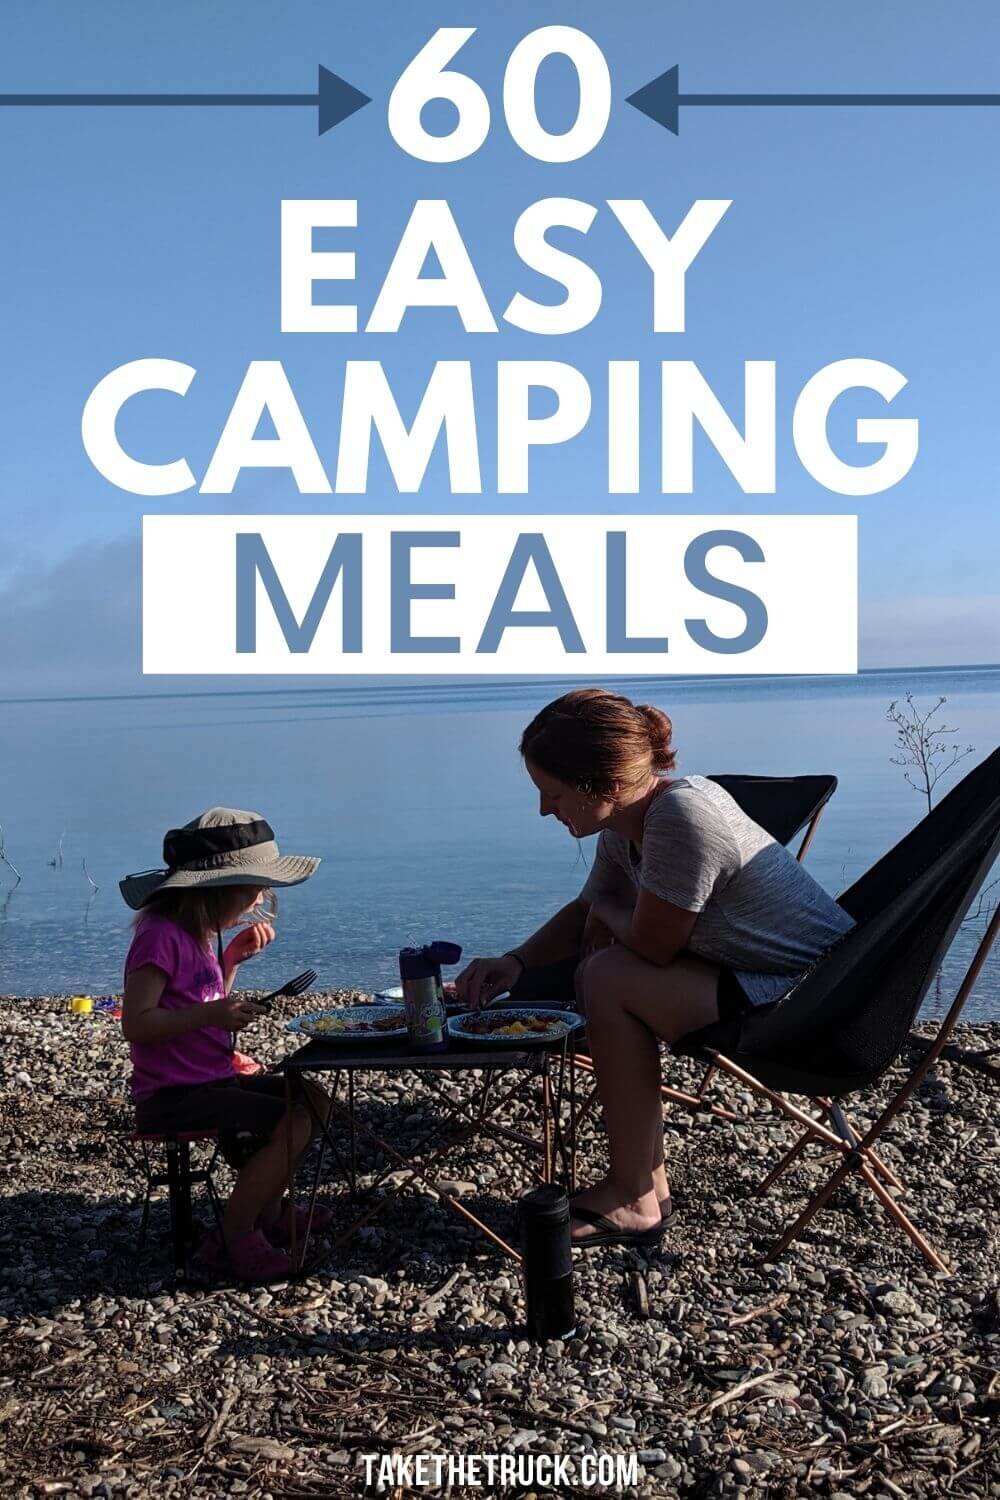 60 different easy camping food and meal ideas! Simple camping breakfasts, lunches, easy camping dinners, plus sides, camping snacks, and desserts - all either no cook or make ahead.